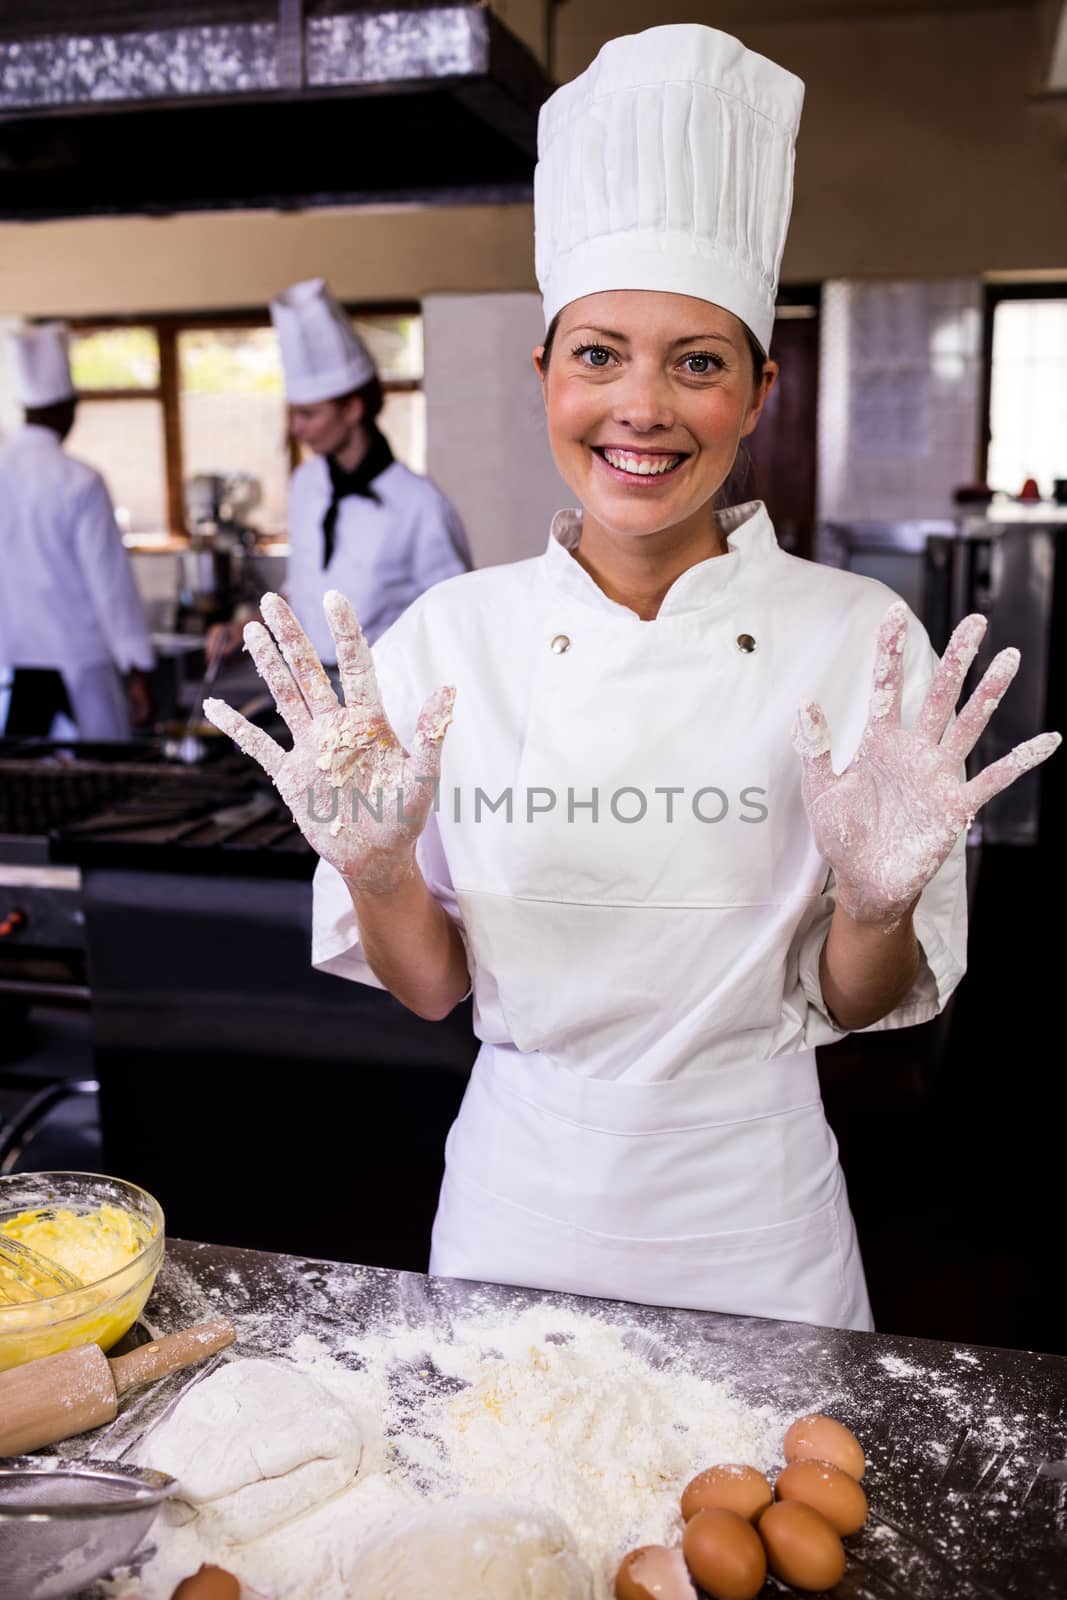 Female chef showing her messy hands in kitchen by Wavebreakmedia